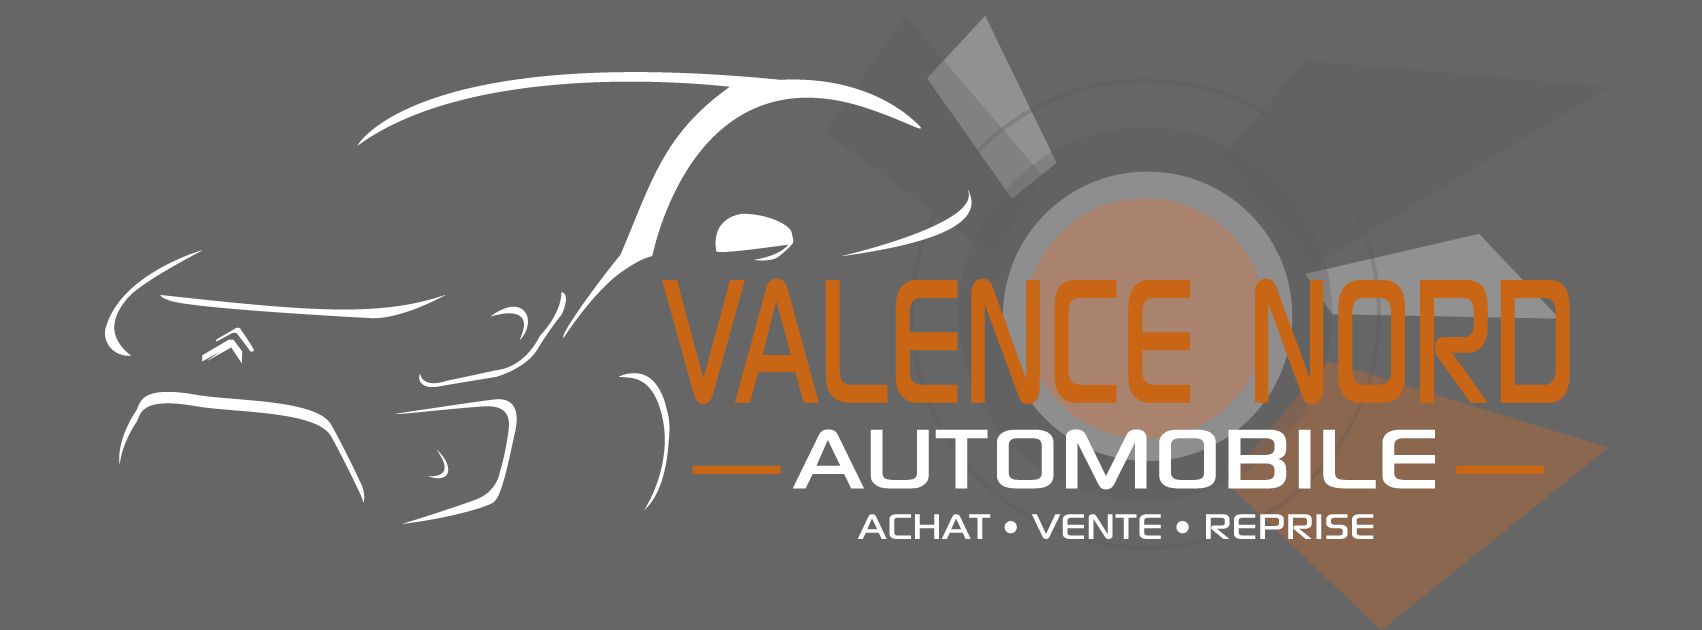 VALENCE NORD AUTOMOBILE